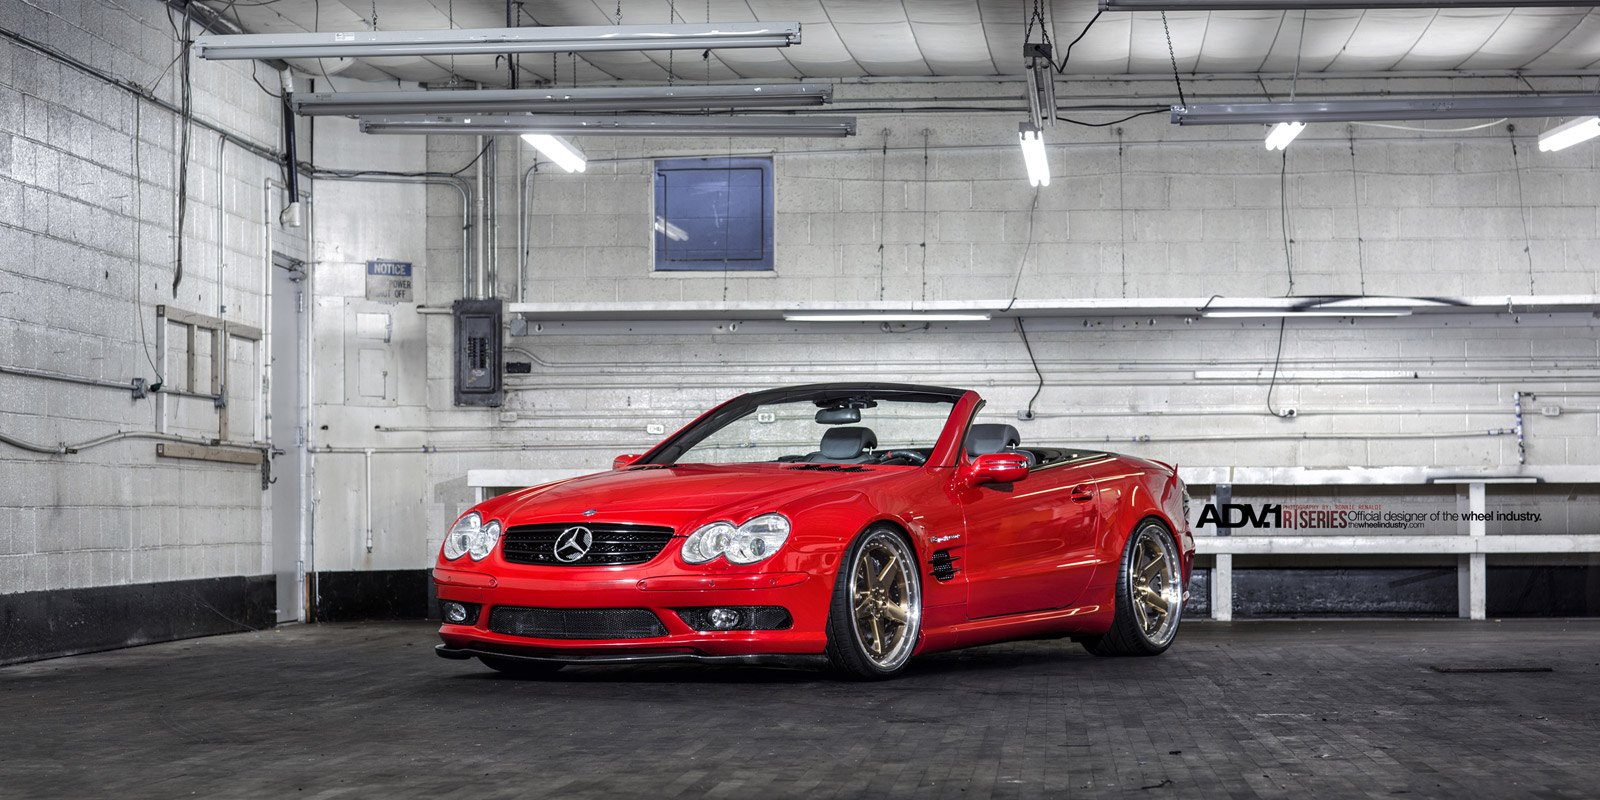 Crystal Clear Headlights on Red Convertible Mercedes SL Class - Photo by ADV.1